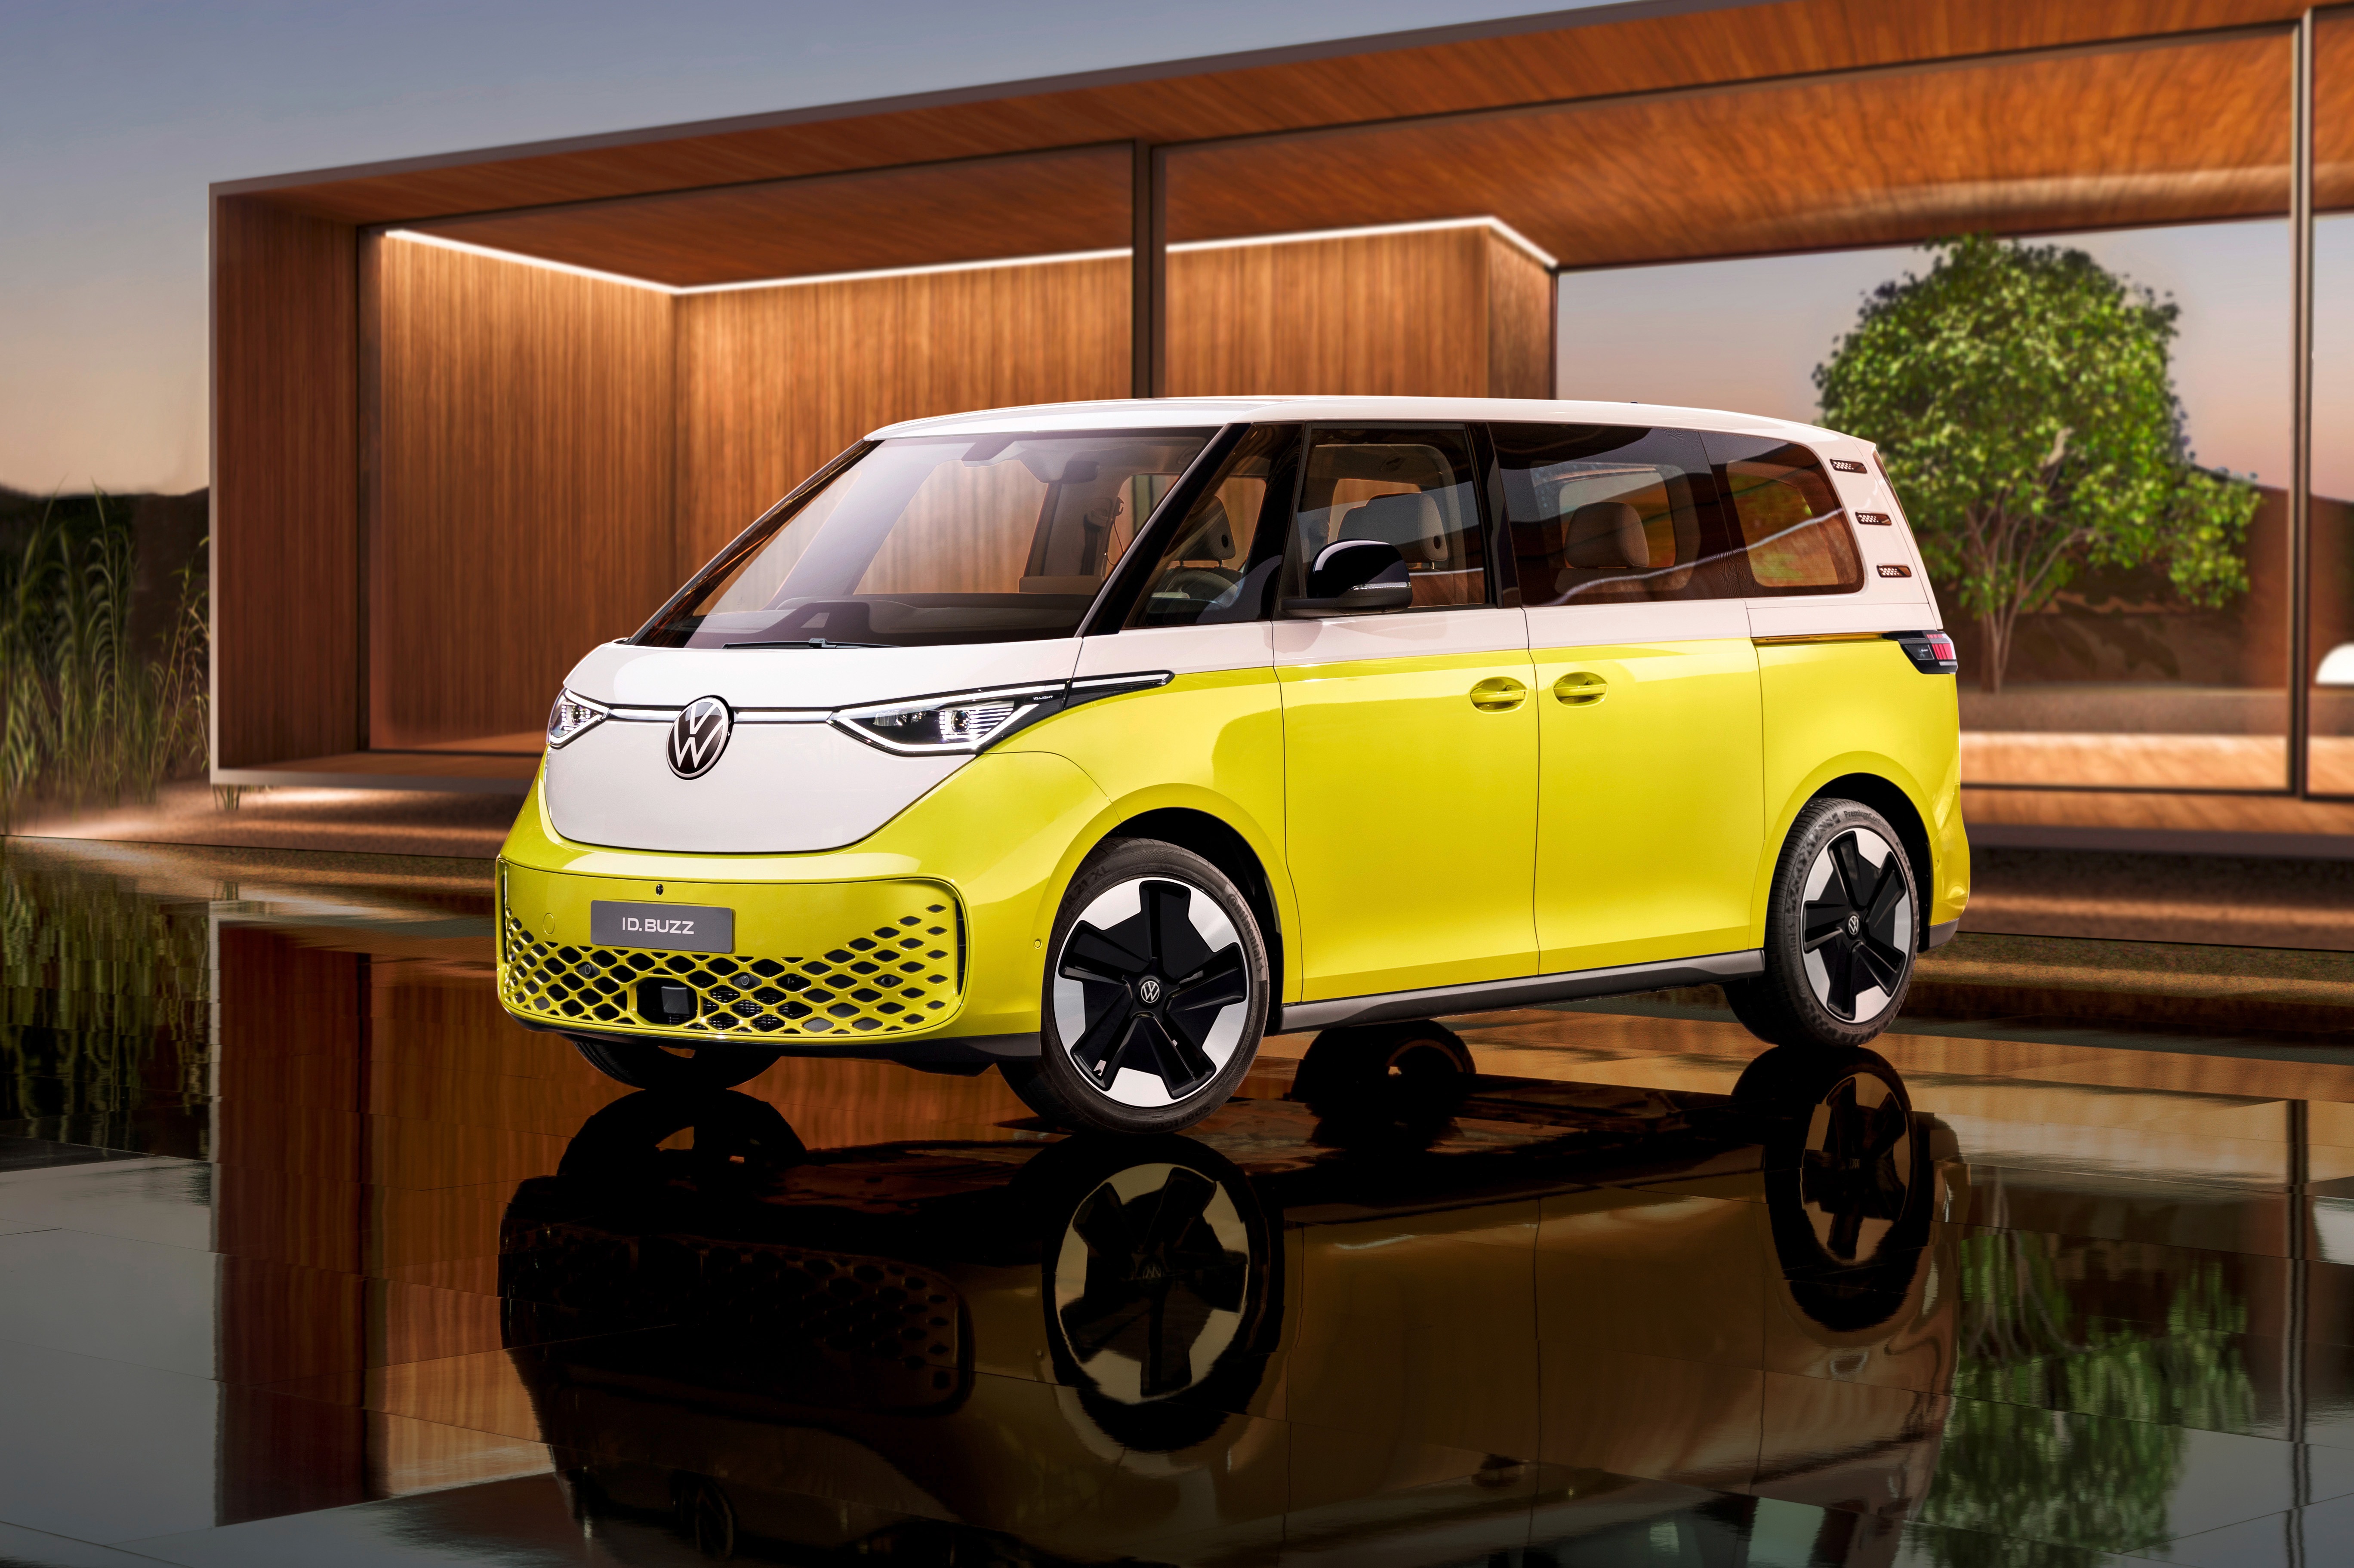 The new all-electric Volkswagen ID. Buzz is open for order